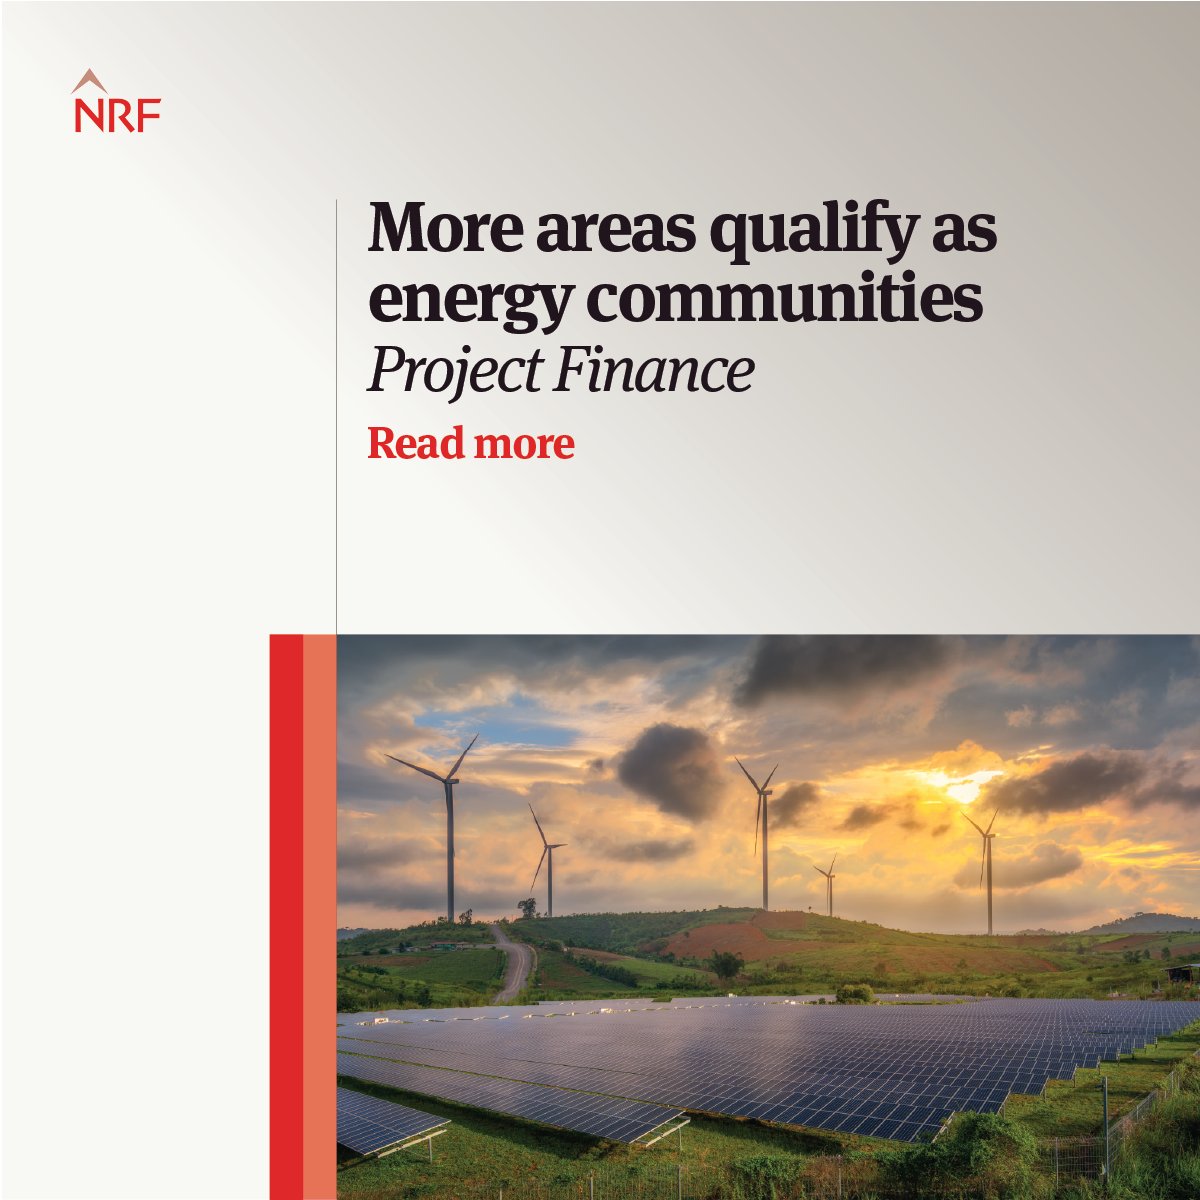 The IRS said renewable energy projects in 446 more US counties are potentially eligible for a 10% energy community bonus tax credit and made it easier for offshore wind projects to qualify. See details at this link: ow.ly/aJuk50R0kEU